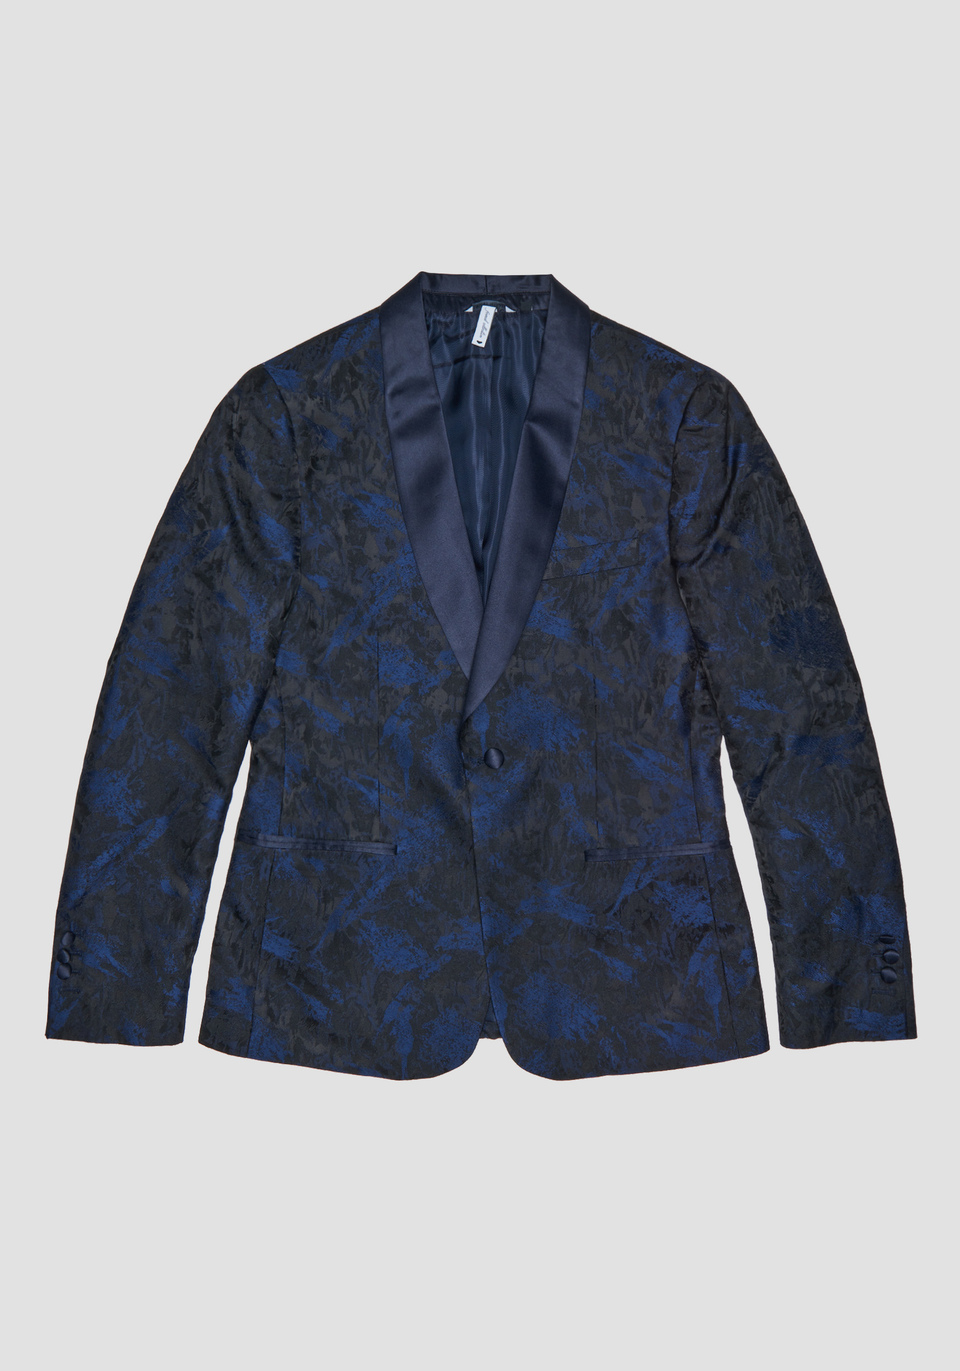 SLIM-FIT “BLANCHE” JACKET IN A SATIN-FINISH FABRIC WITH JACQUARD PATTERNING - Antony Morato Online Shop